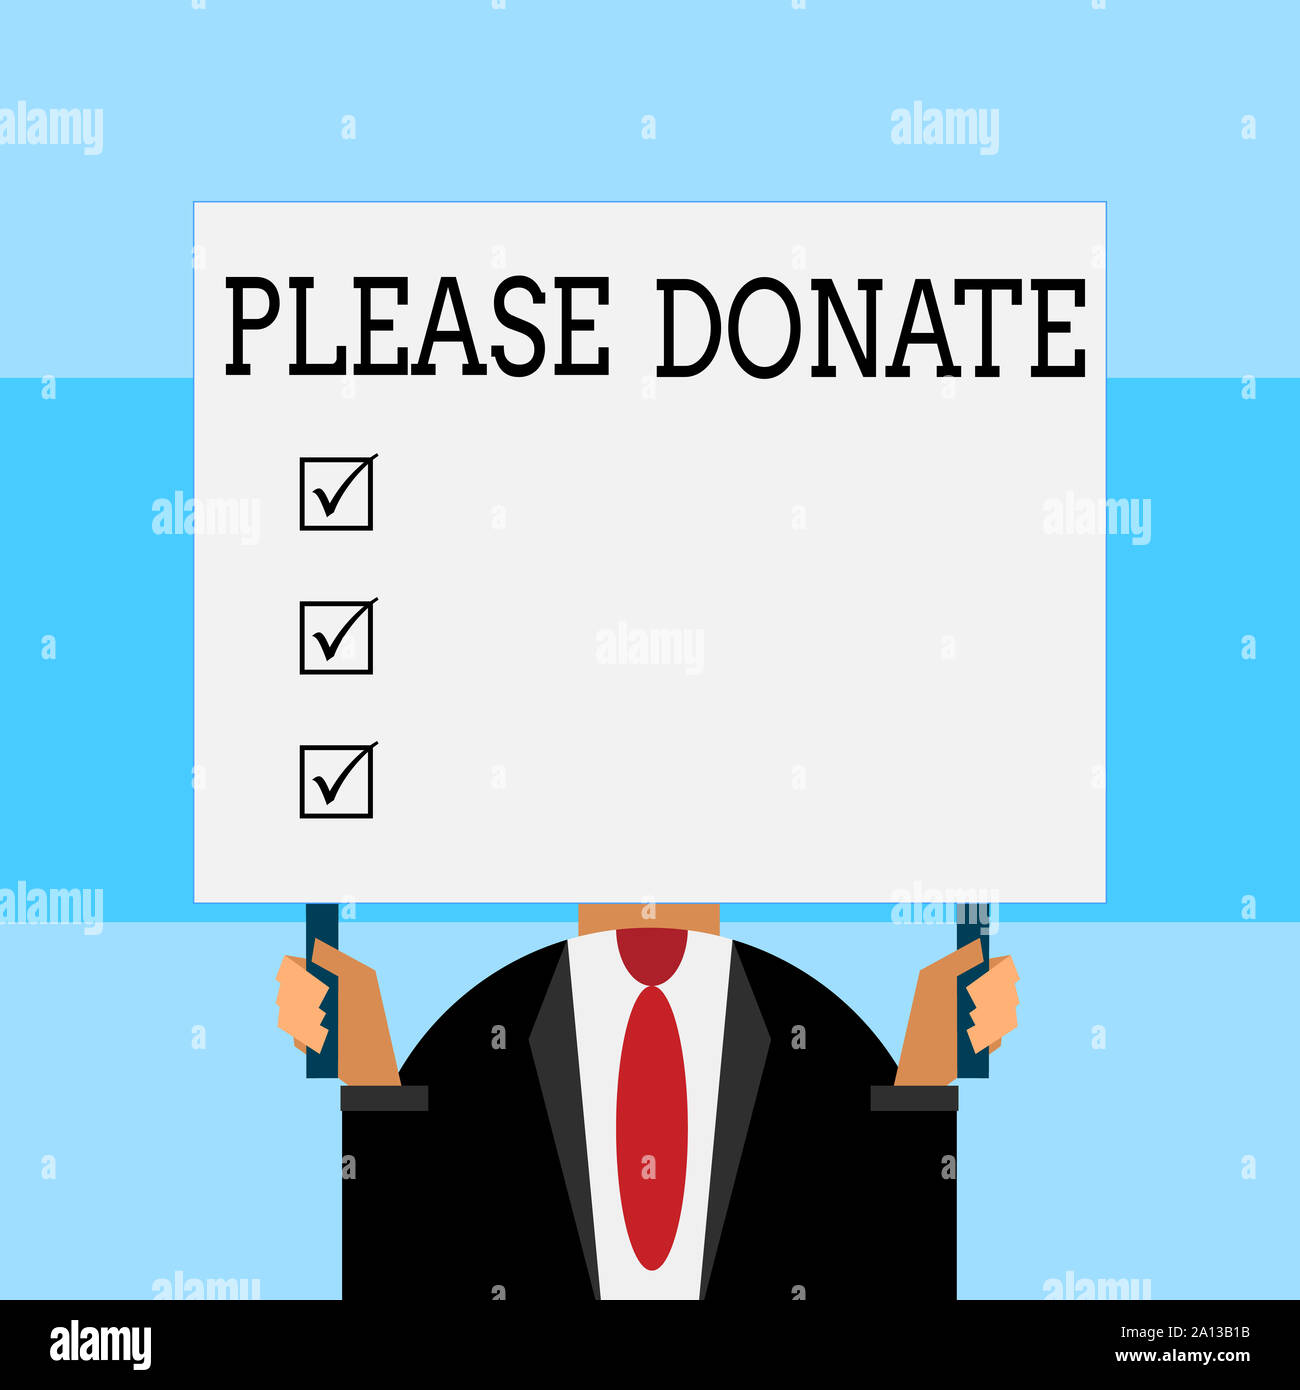 Donate please Stock Vector Images - Alamy